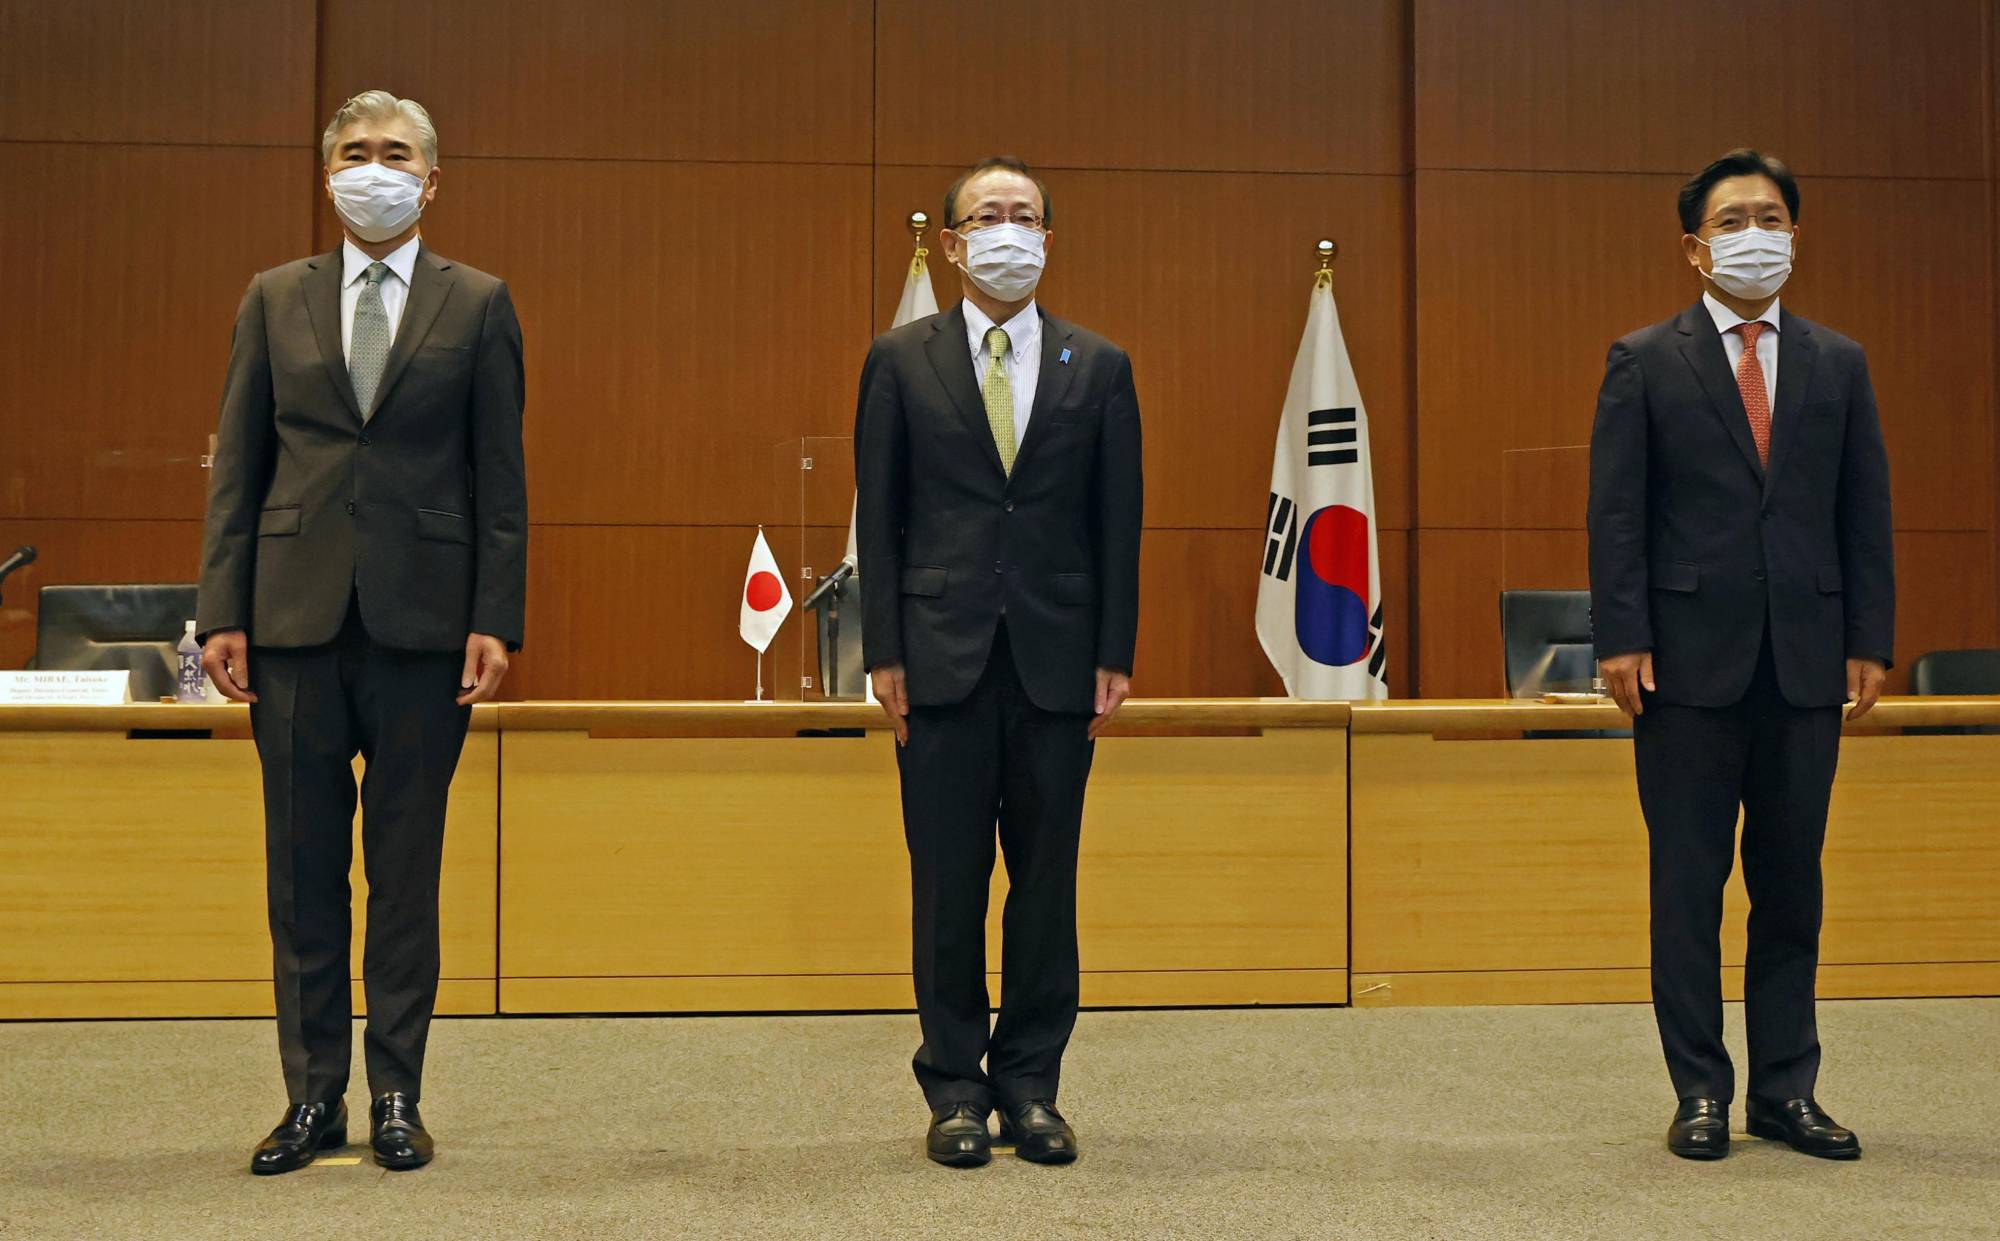 Sung Kim (left), U.S. special representative for North Korea, Takehiro Funakoshi (center), director general of the Foreign Ministry's Asian and Oceanian Affairs Bureau, and Noh Kyu-duk, South Korea's special representative for Korean Peninsula peace and security affairs, meet in Tokyo on Sept. 14. | KYODO